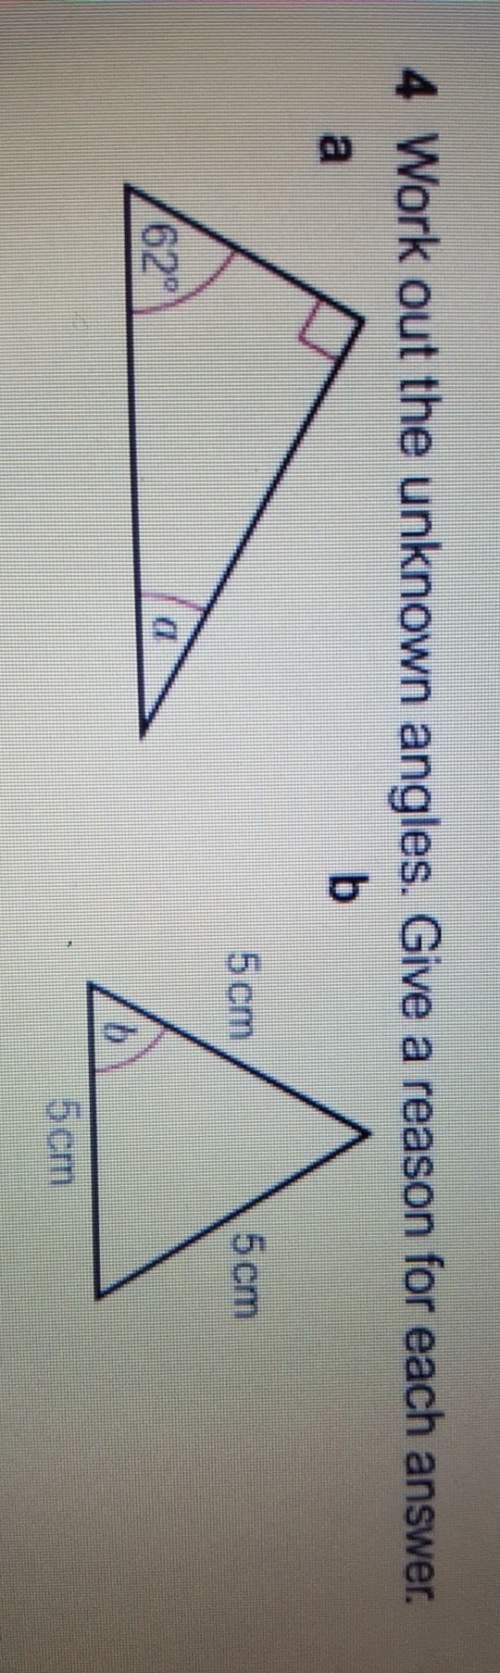 Work out the unknown angles. give reasons for each answer.